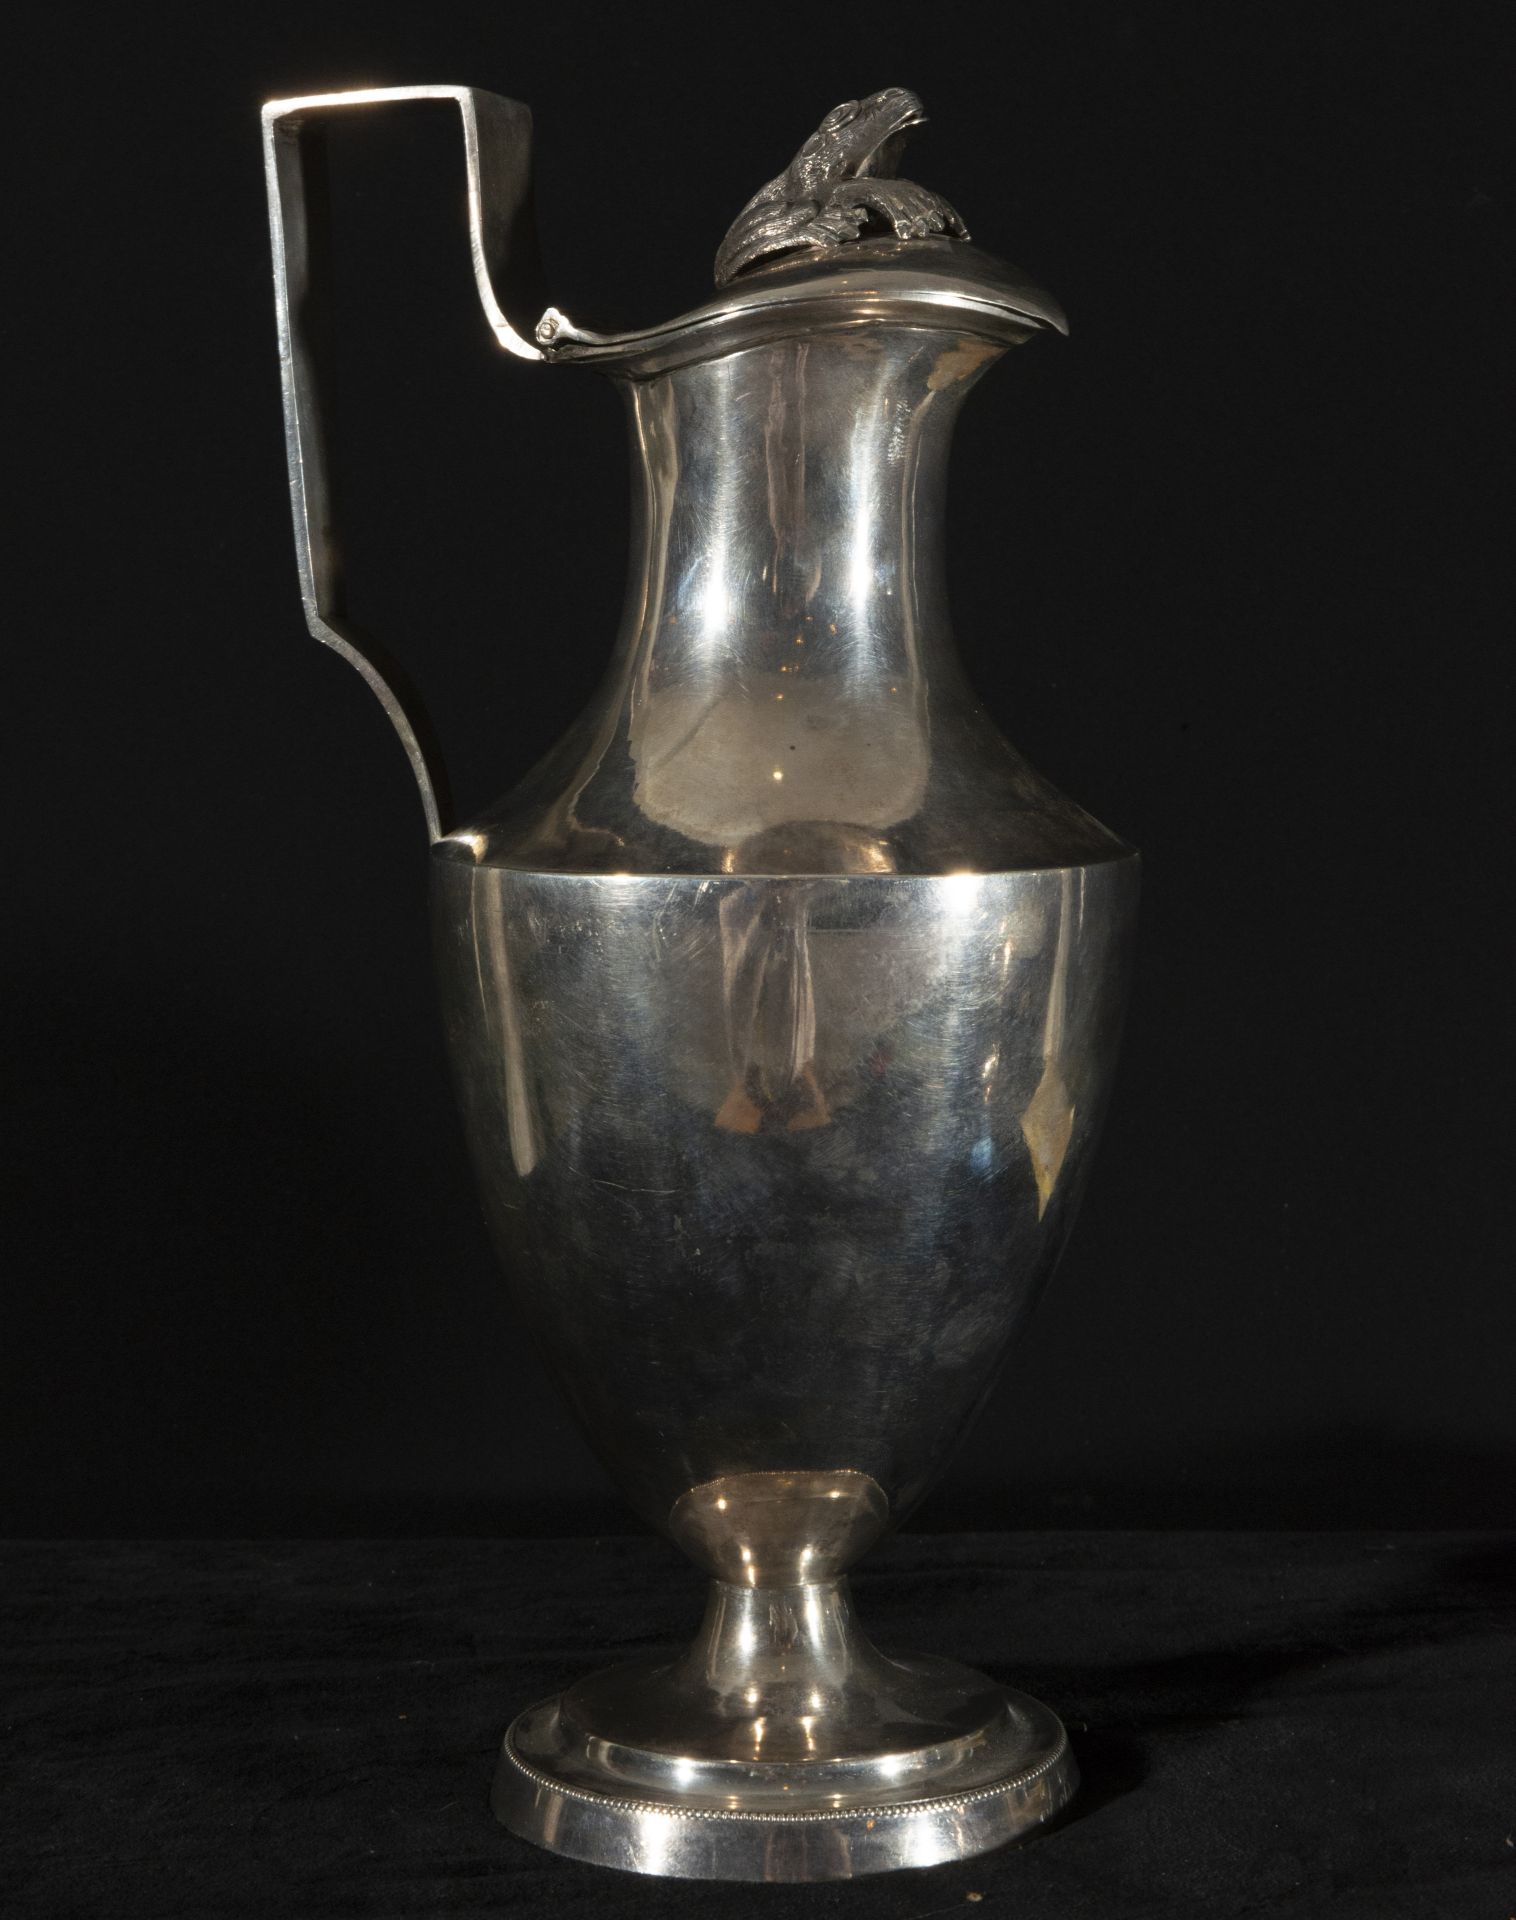 Set of sterling silver pitcher and salt in Spanish silver, late XVIII century, Cordoba marks - Image 6 of 7